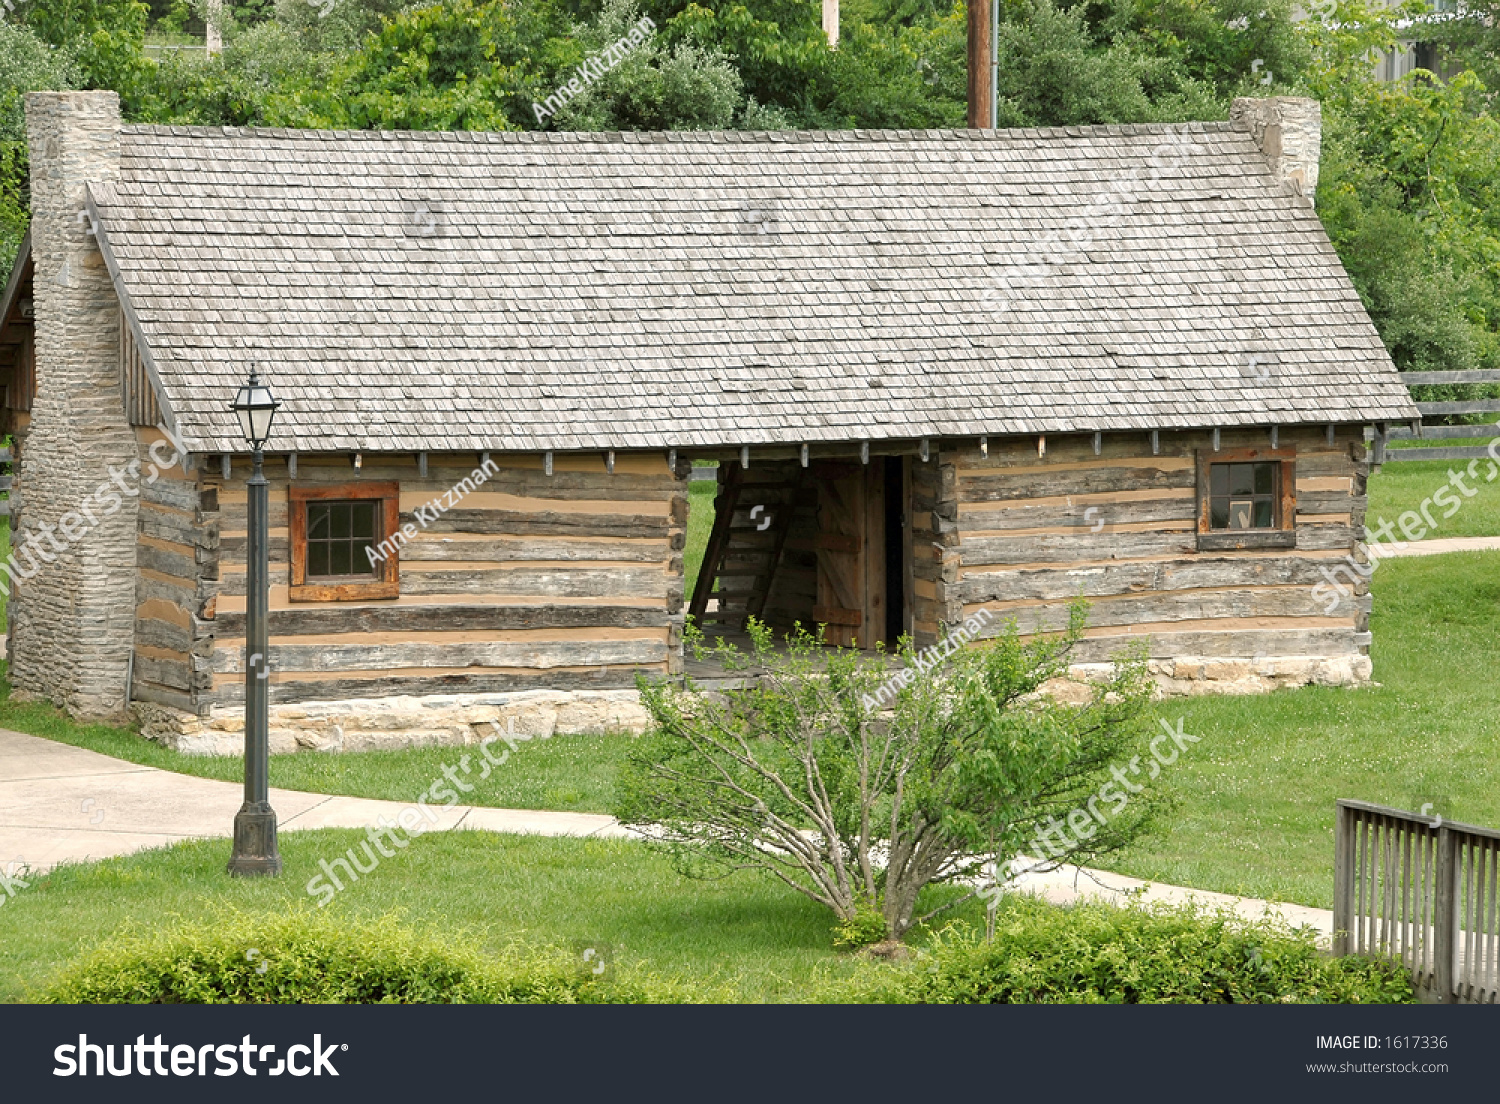 Historic Log Cabin In A Settlement In Kentucky, Usa That Was Built ...